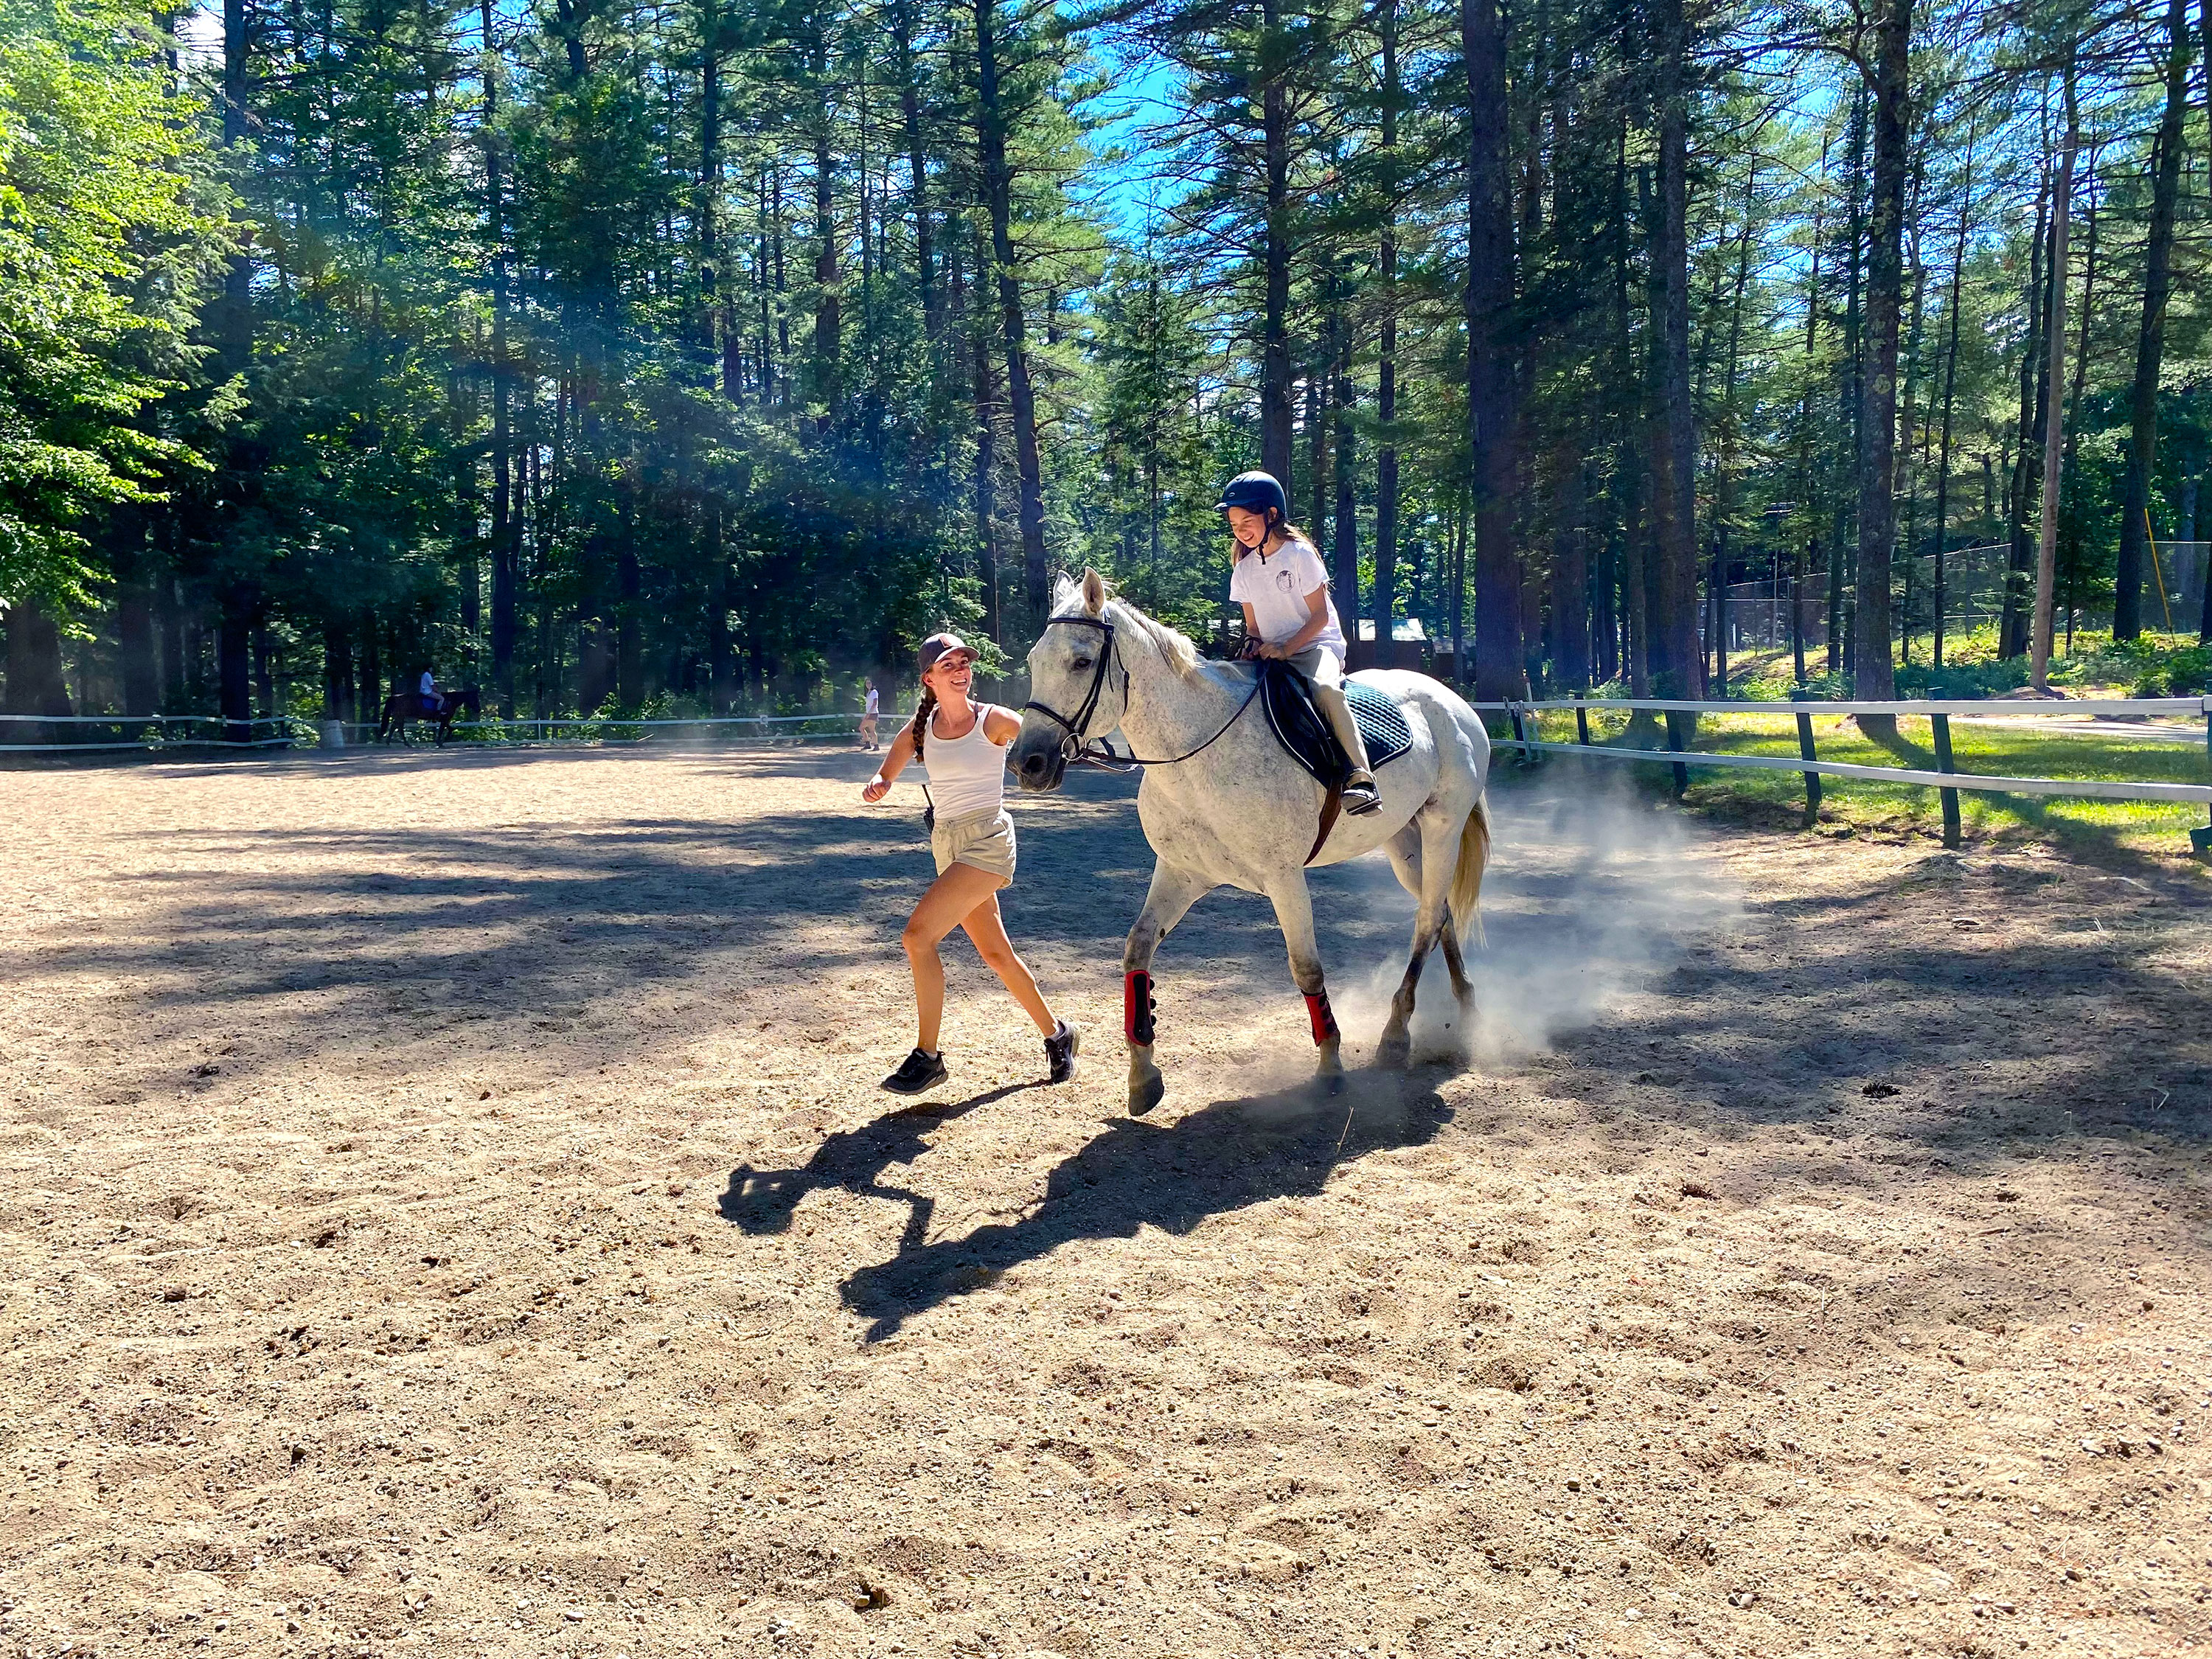 A young camper rides a white horse for the first time.